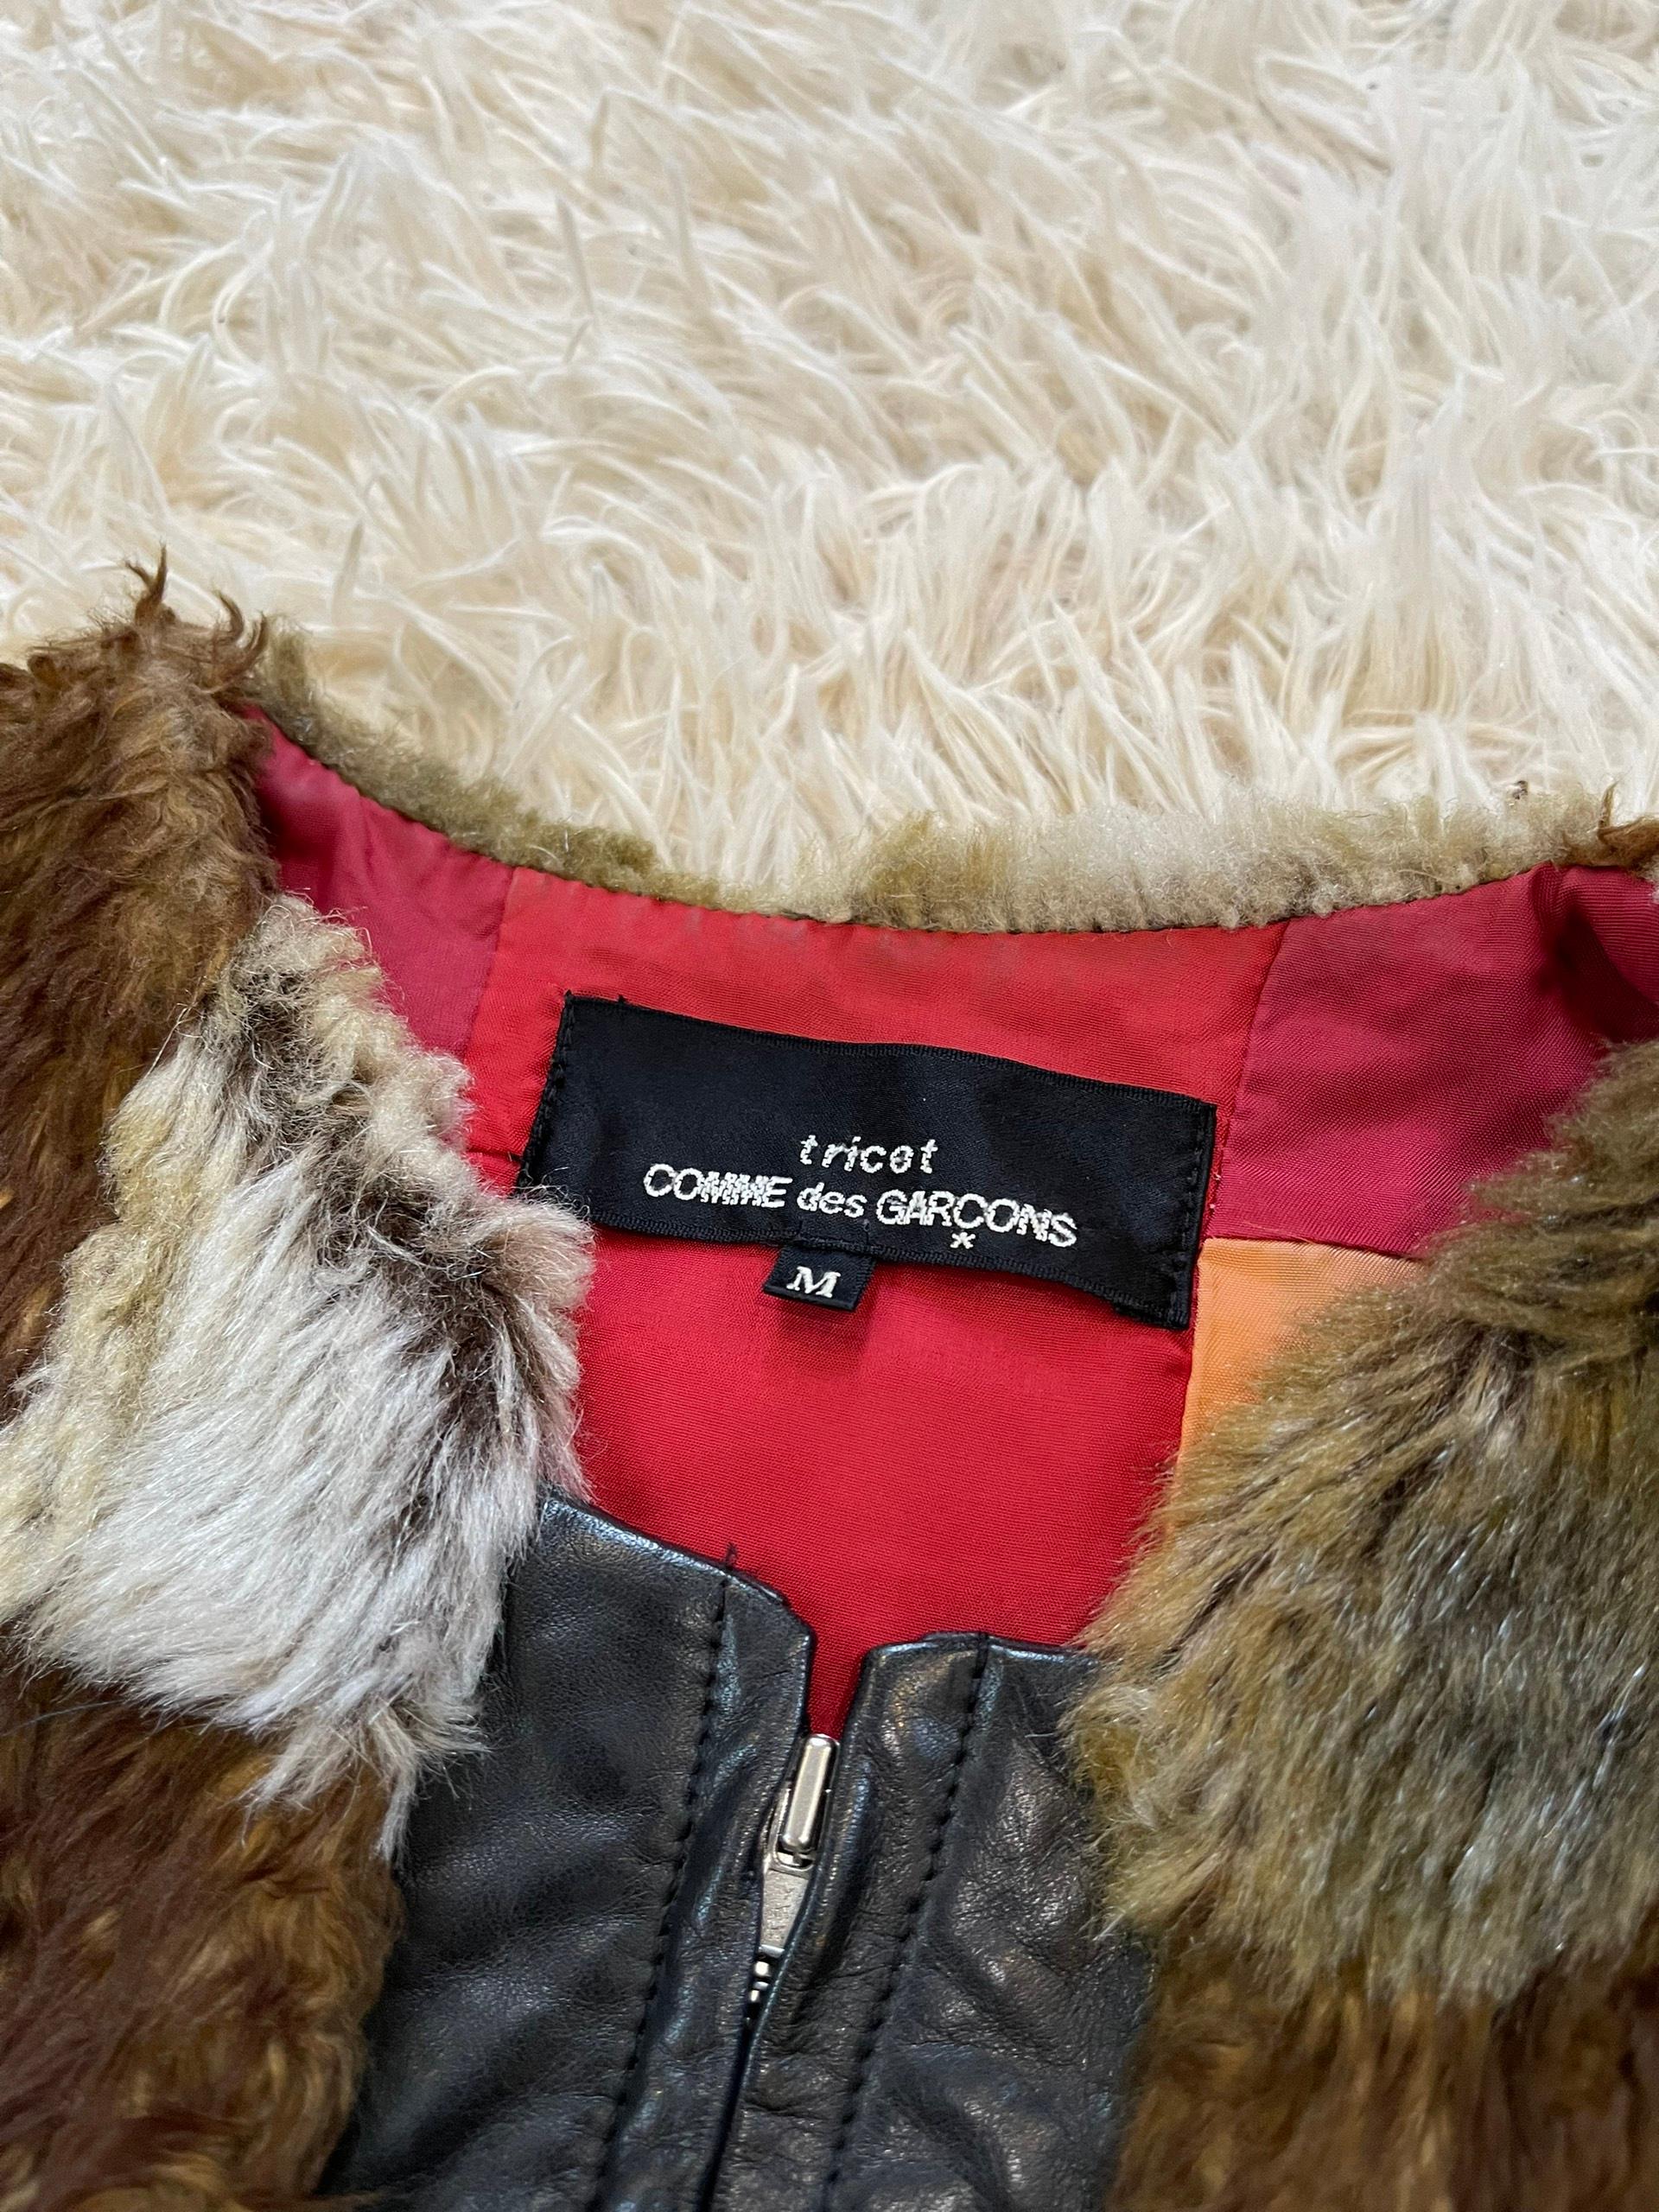 Medium-length fur vest with reversible feature, one side is fur embroidered, the other side is cotton based, with bi-color duo of red and orange.

Size: Not listed, feels like M

Condition: 8,5/10. No significant signs of usage.

Feels free to